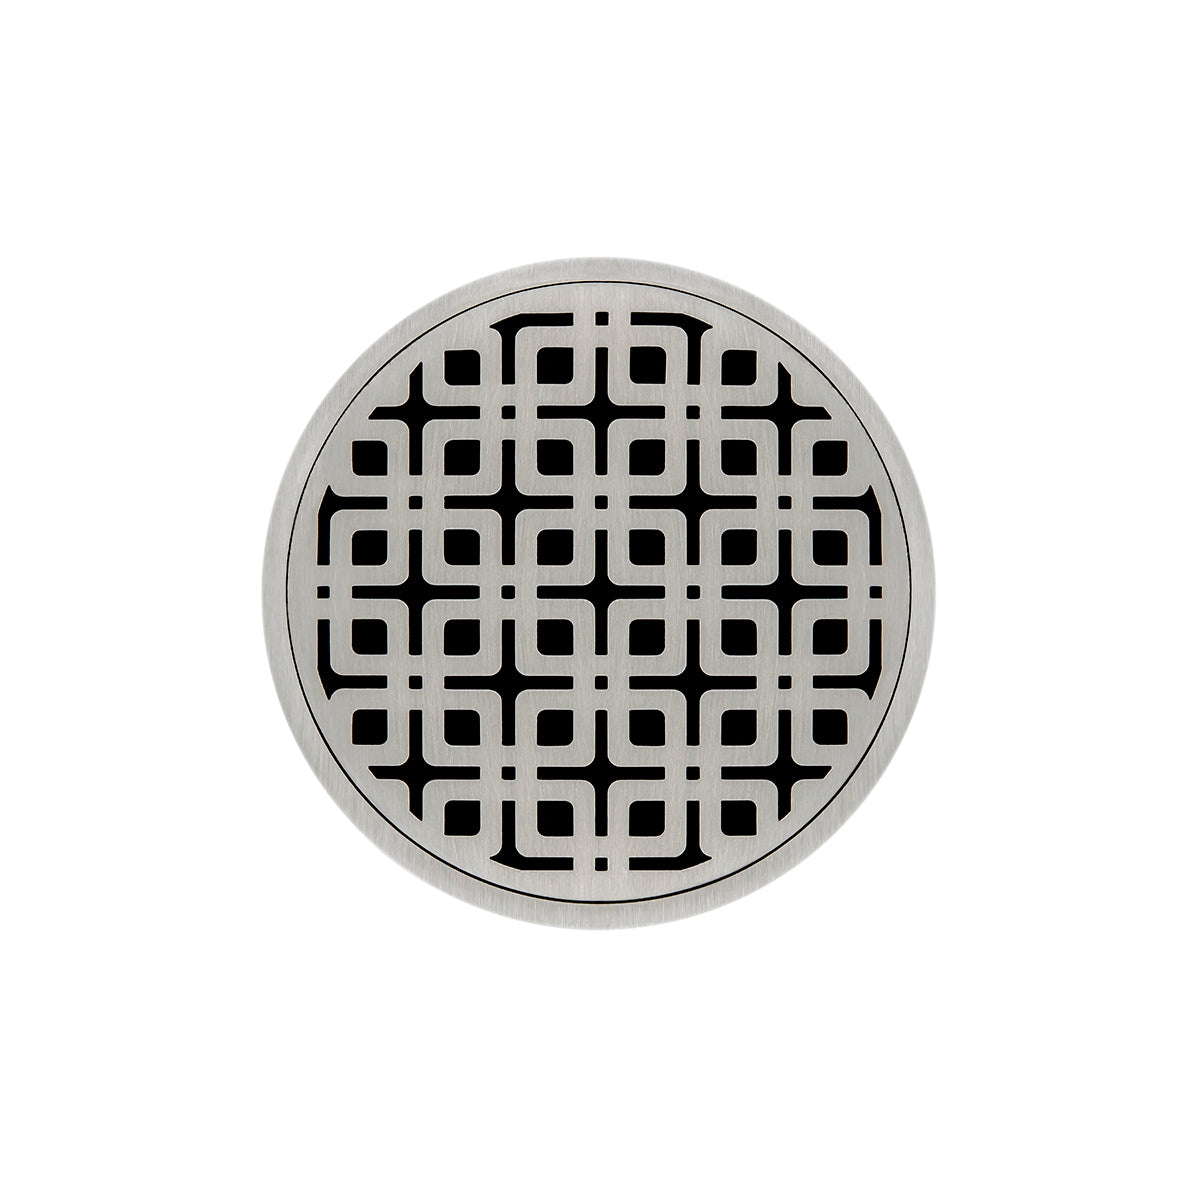 Infinity Drain 5" Round RKDB 5 Premium Center Drain Kit with Link Pattern Decorative Plate with PVC Bonded Flange Drain Body, 2", 3" and 4" Outlet